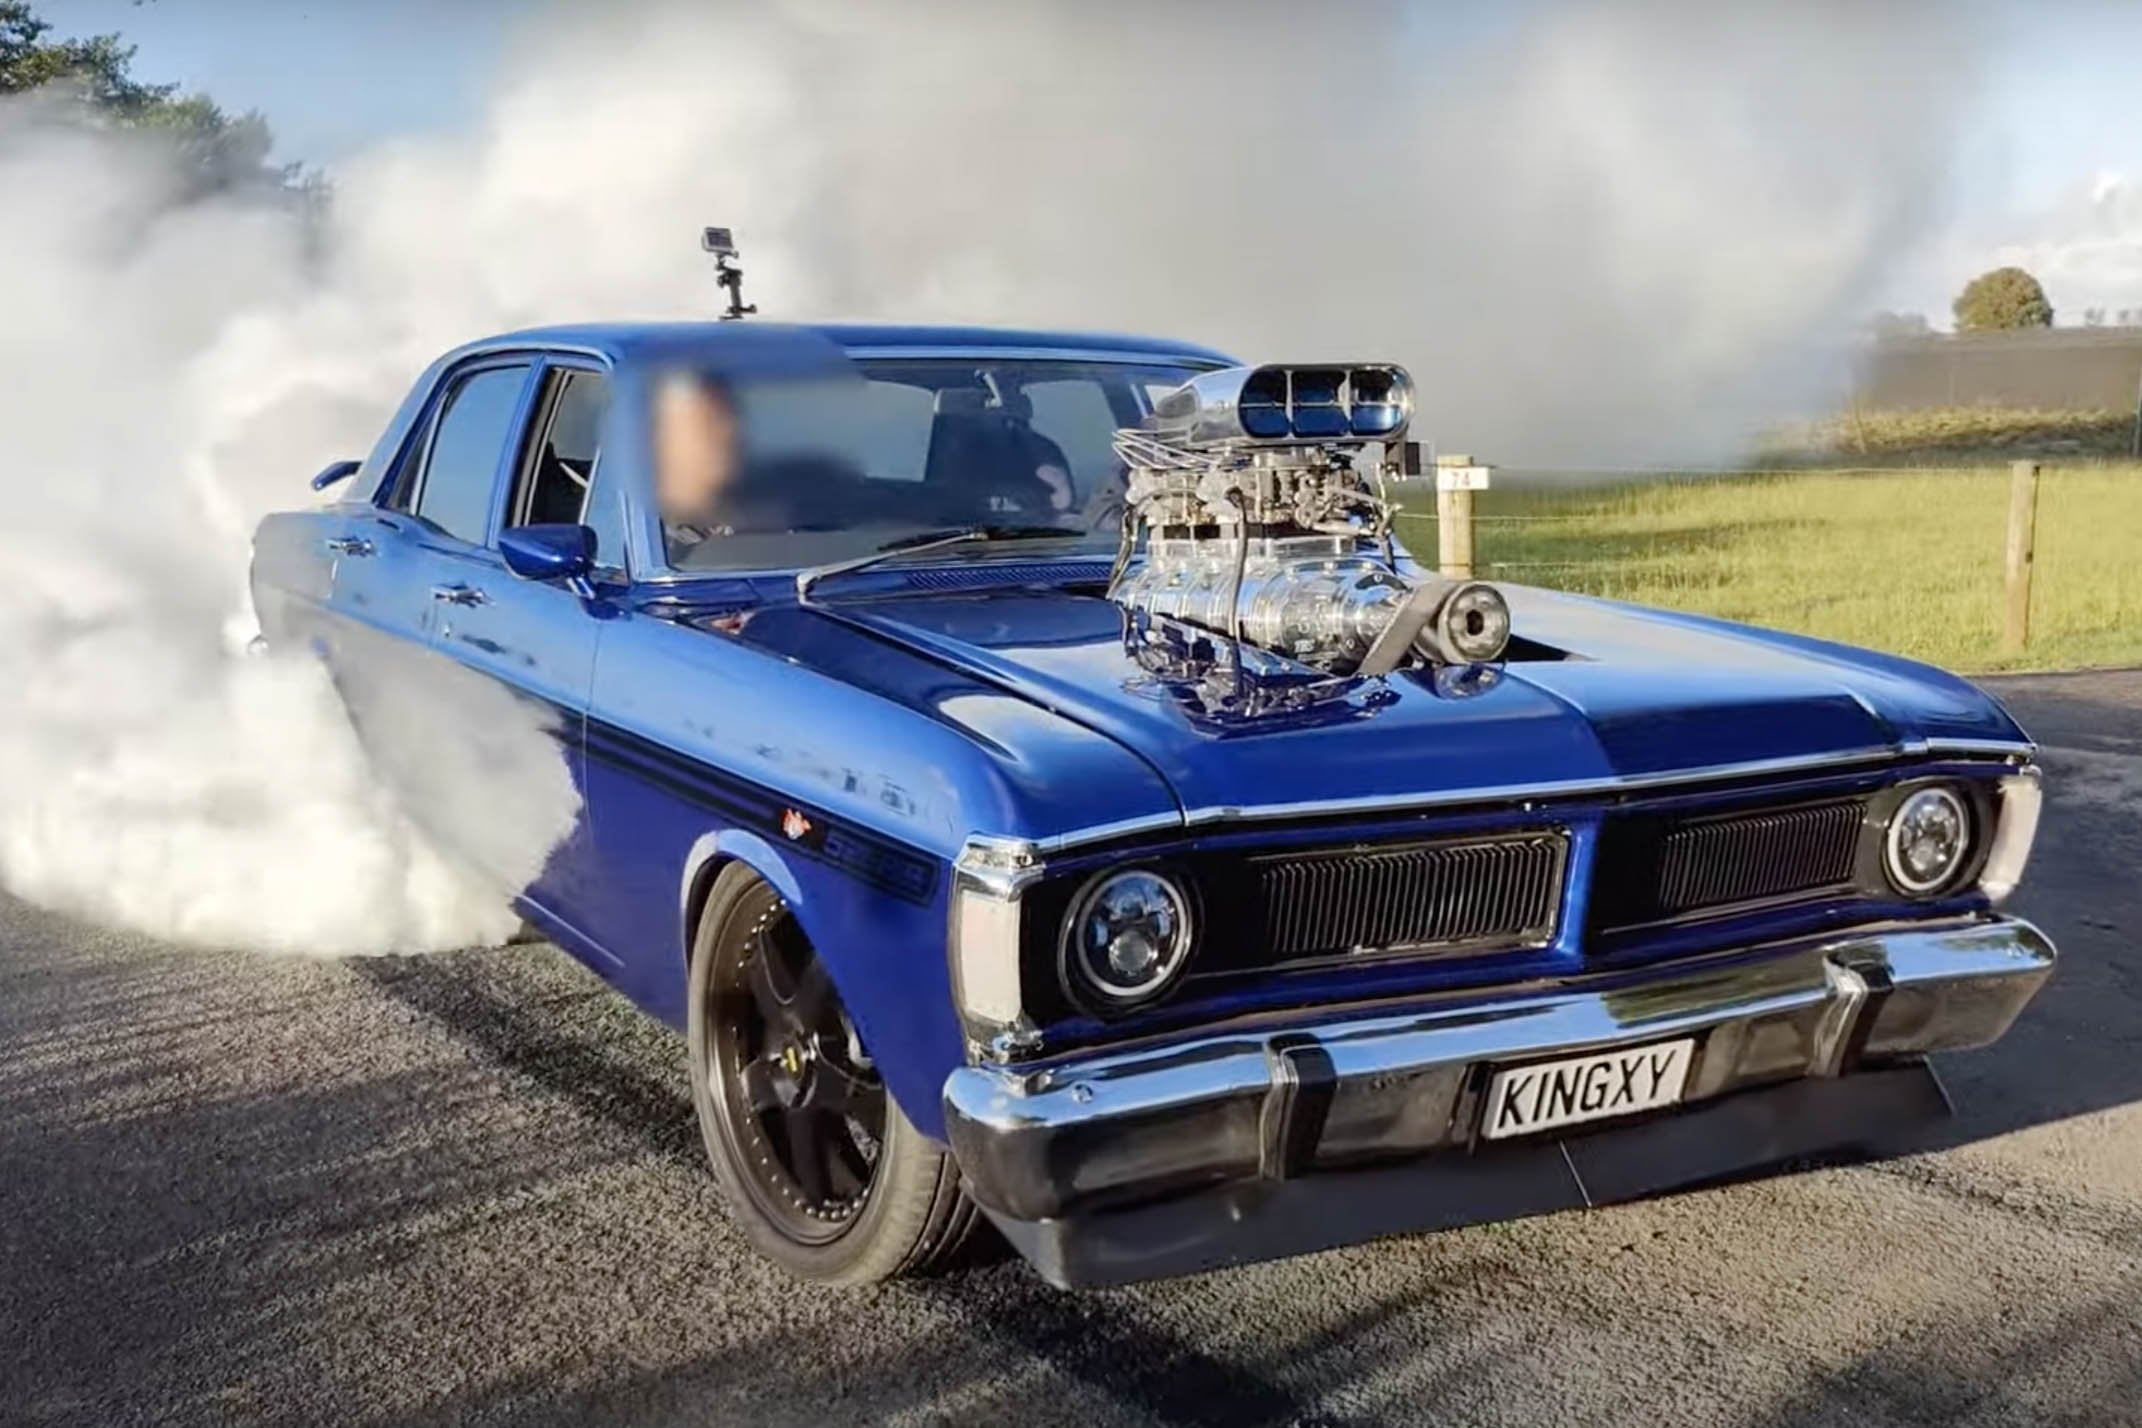 1970 Ford Falcon Brings Big-Block Smoke Show To The Pavement